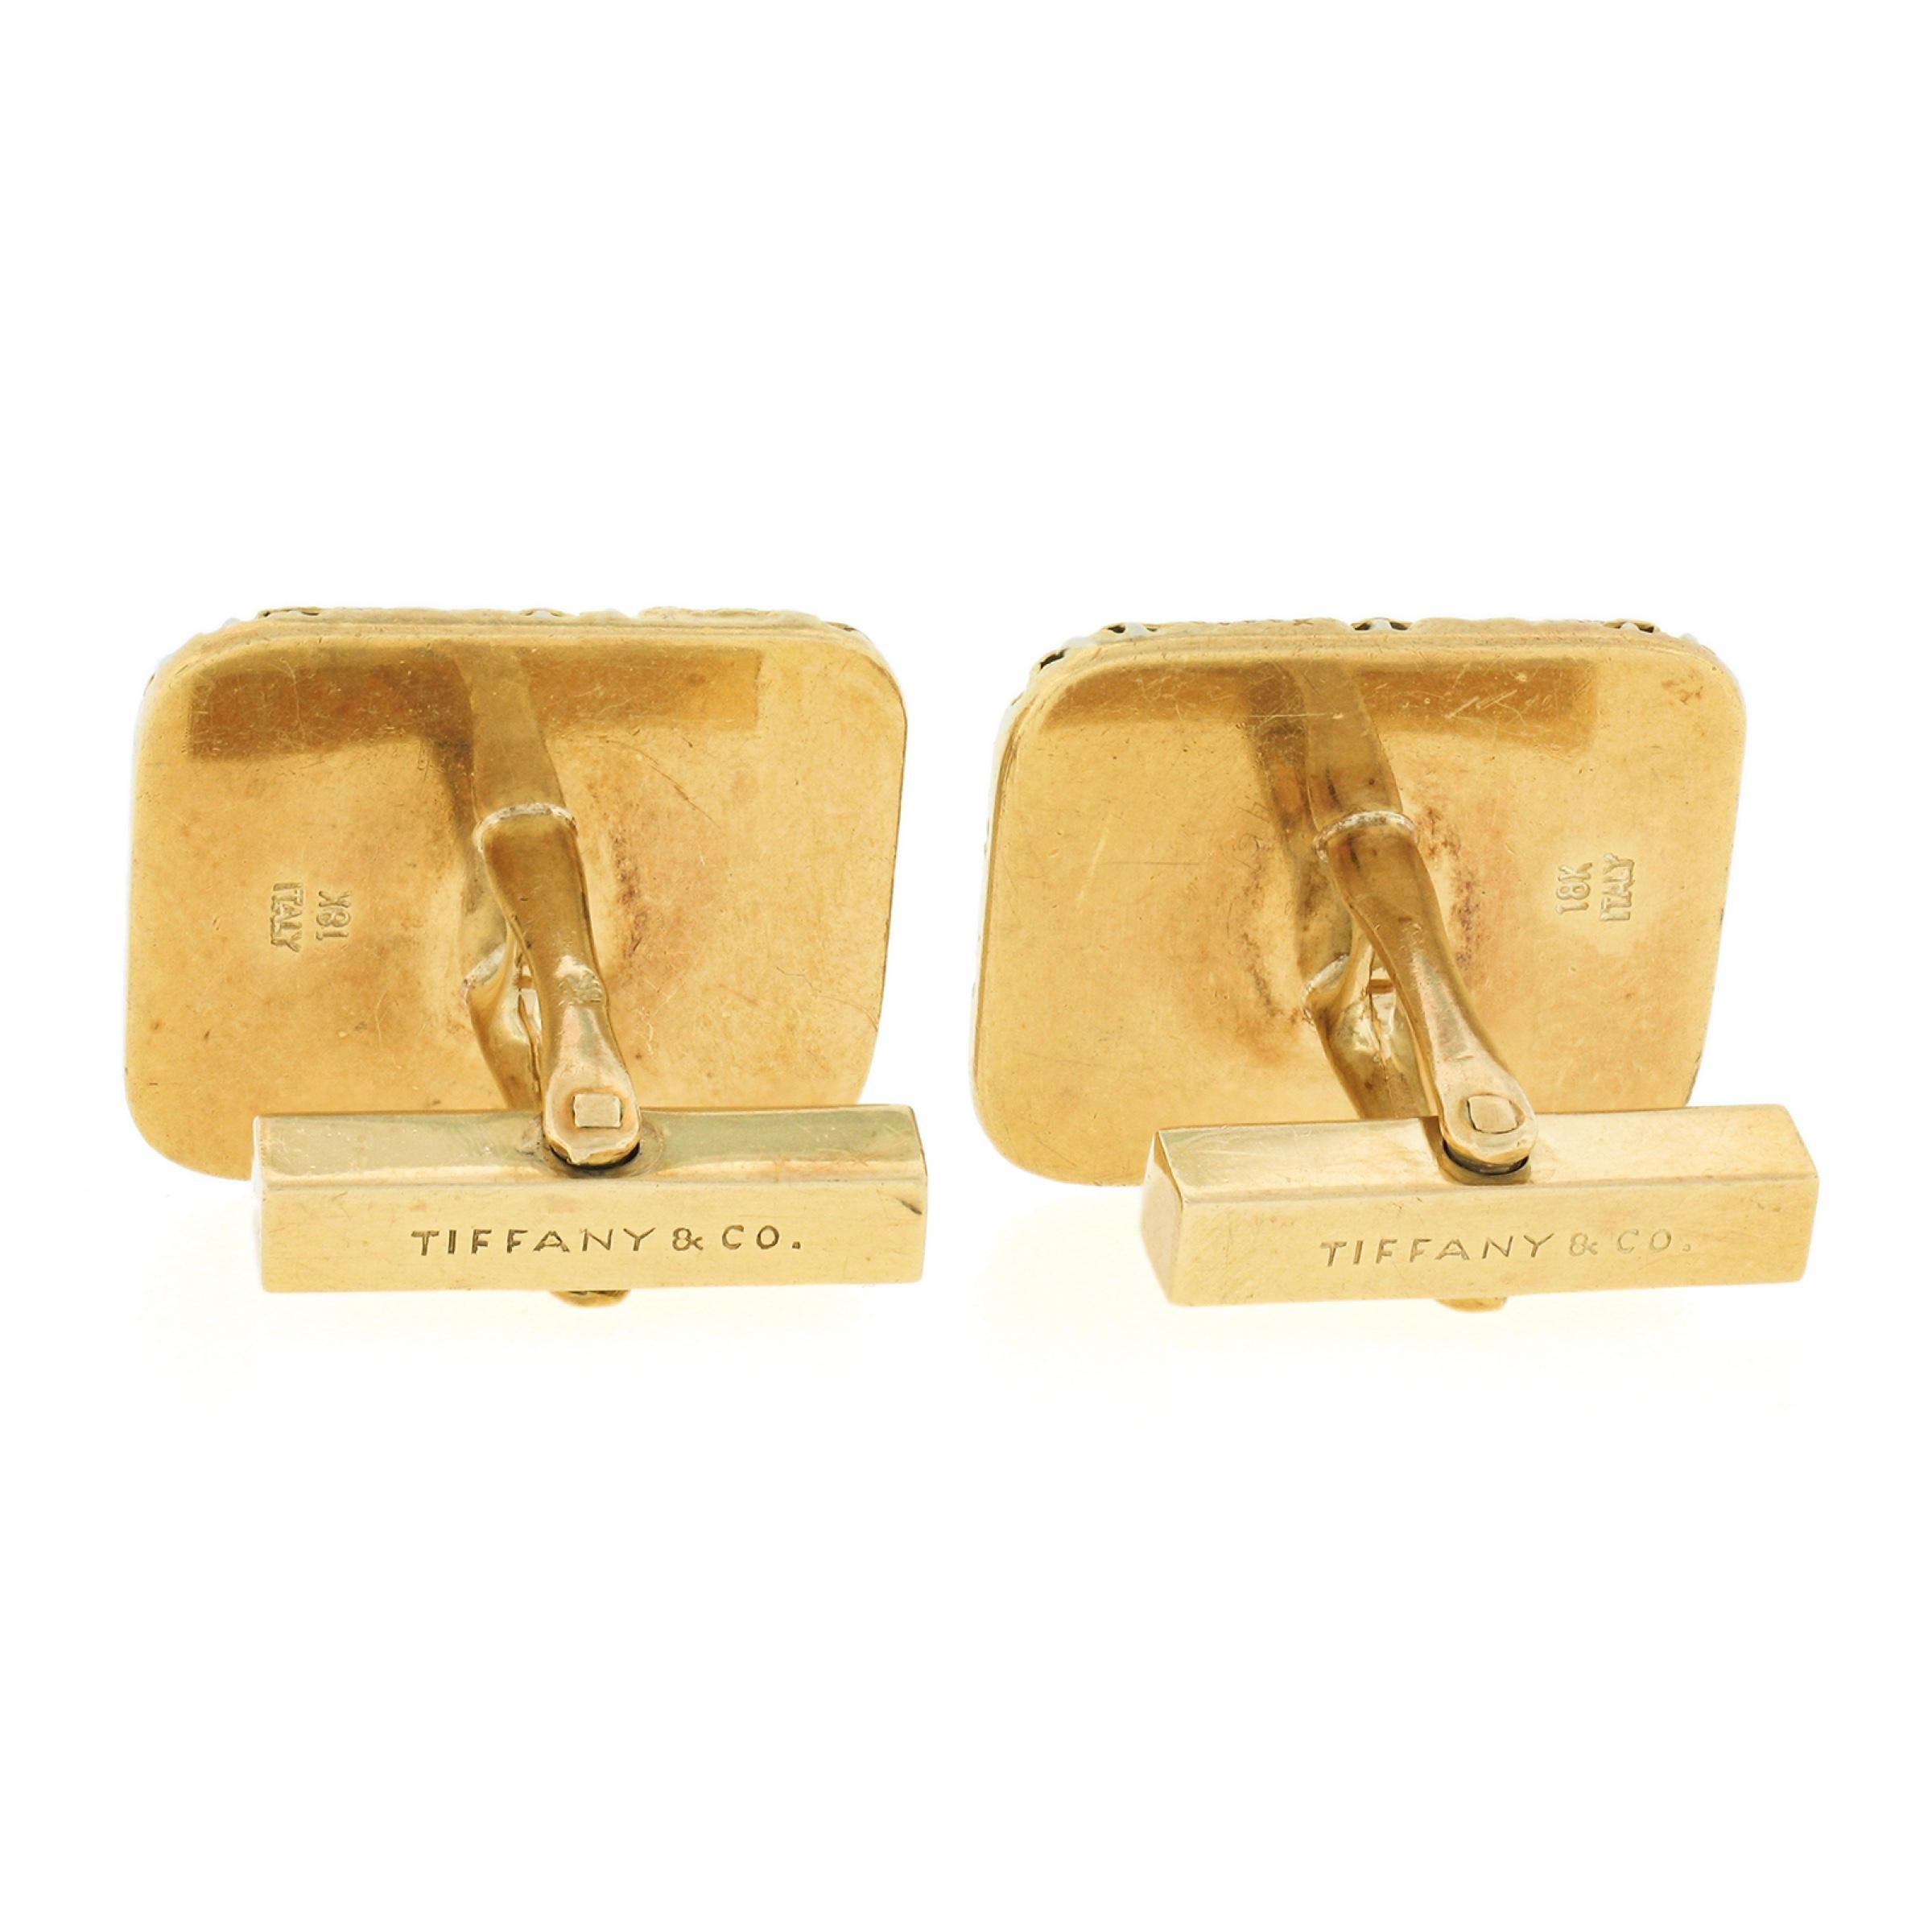 100% guaranteed authentic, Tiffany and Co. bold and elegant vintage cuff links crafted in solid 18k yellow gold and white gold wires feature rectangular cushion shaped platter panel decorated with fine basket woven textured pattern throughout. These